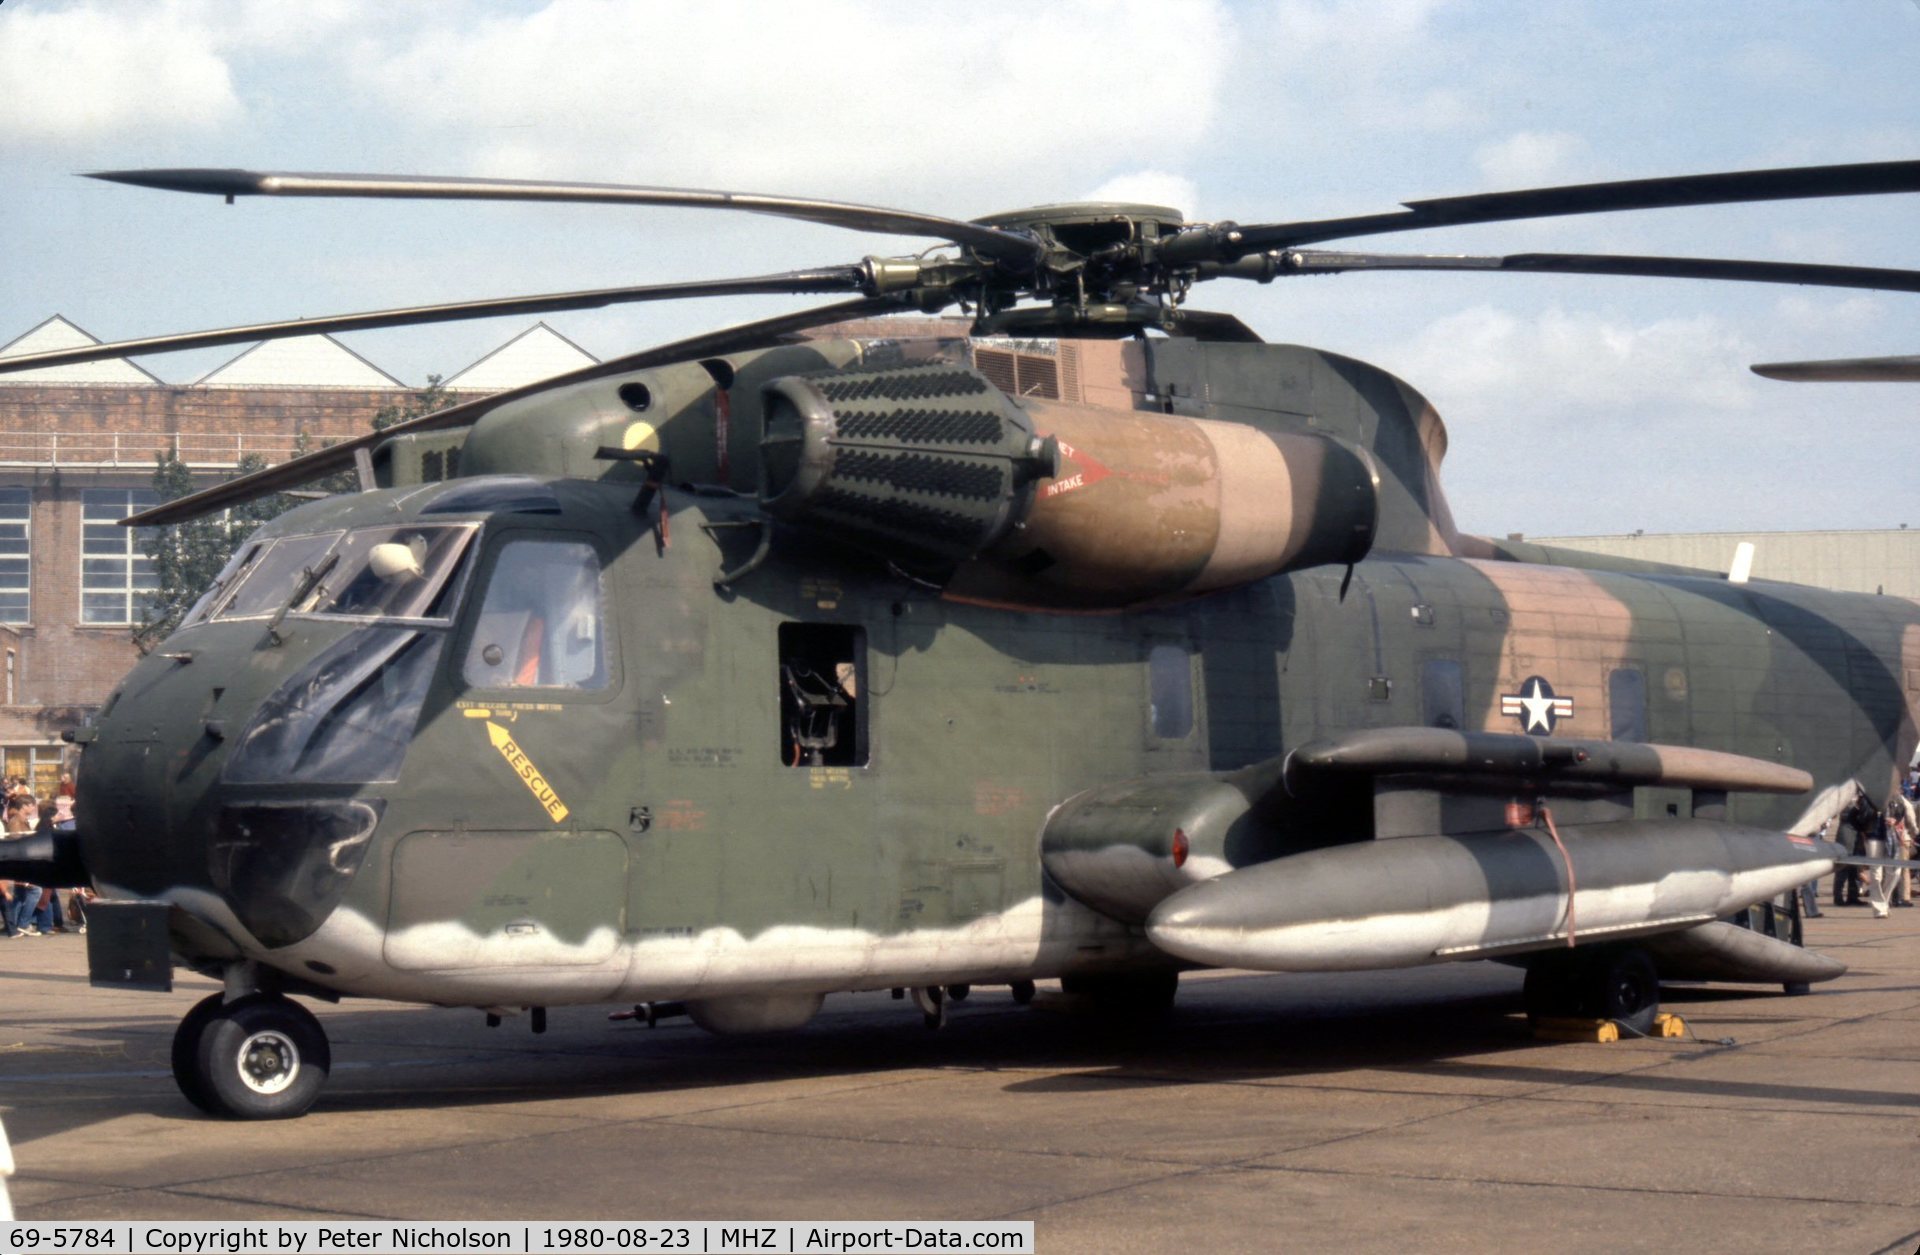 69-5784, 1969 Sikorsky HH-53C Jolly Green Giant C/N 65-232, Another view of the 67 ARRS HH-53C on display at the 1980 Mildenhall Air Fete.